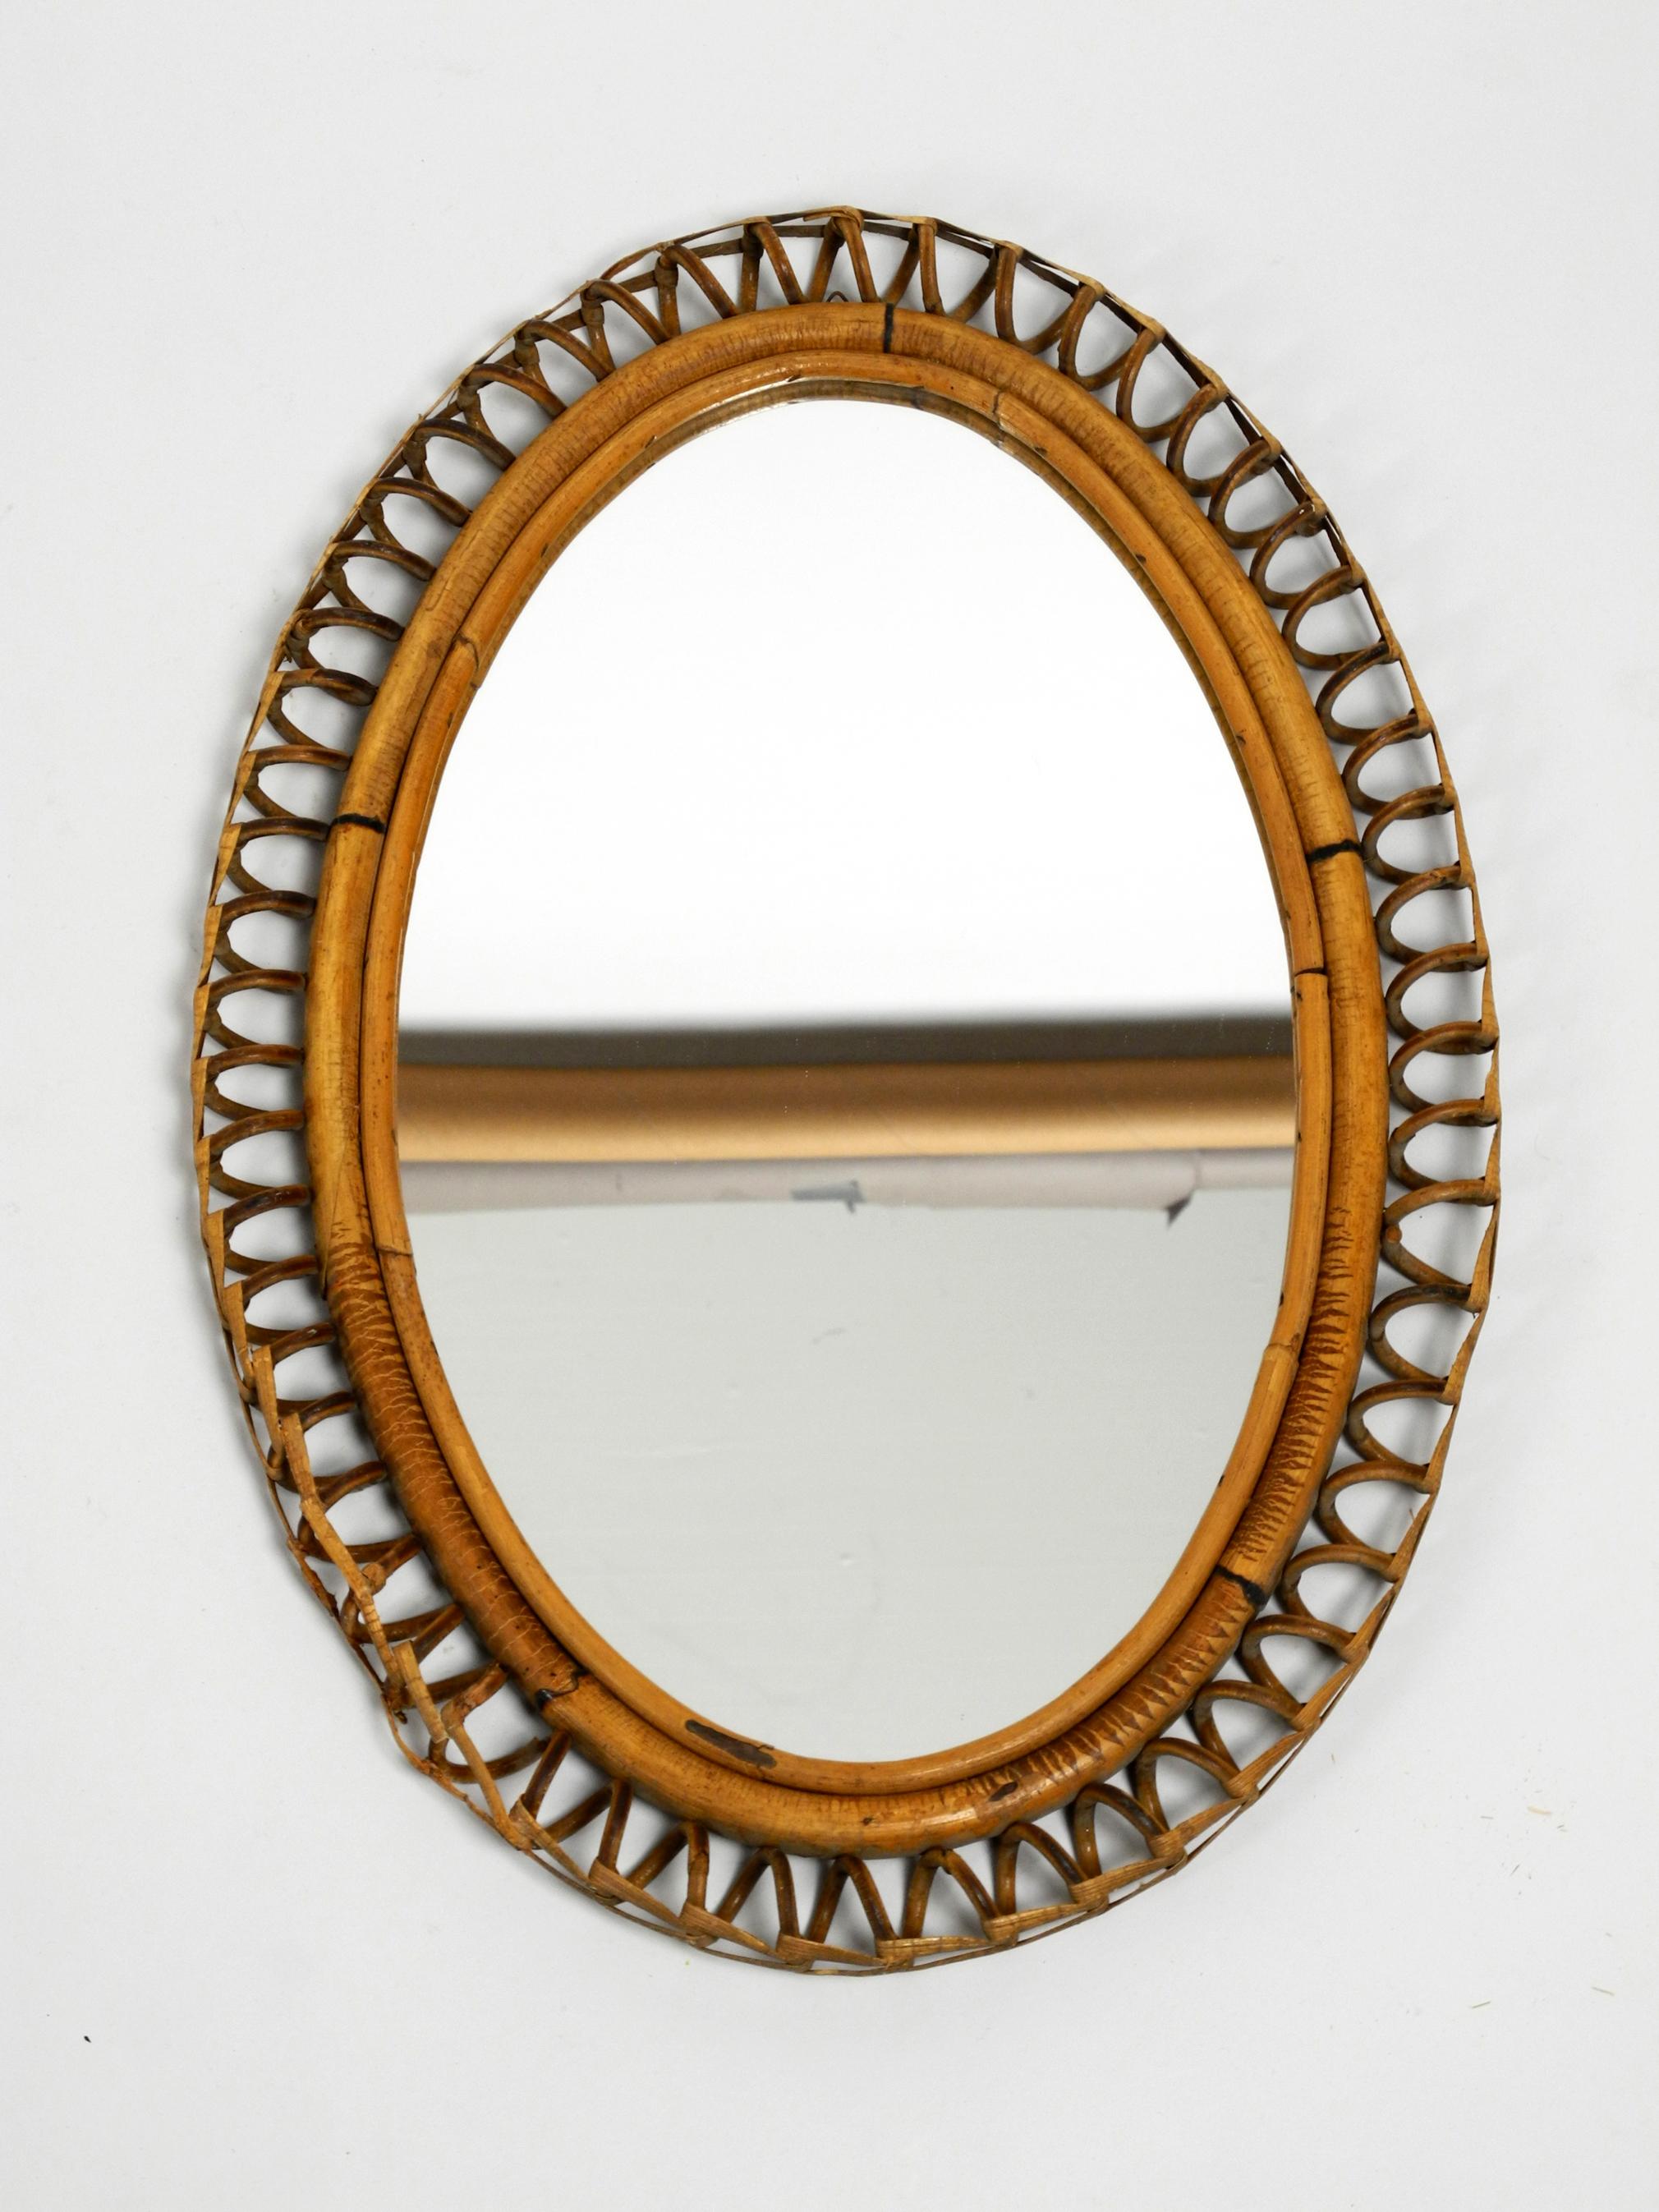 Beautiful rare Italian bamboo wall mirror from the early 1960s. 
Frame and loops are made of curved brown bamboo. 
Abstract minimalistic design. Made in Italy.
Mirror without damages. Not dull.
A couple of very light scratches on the mirror